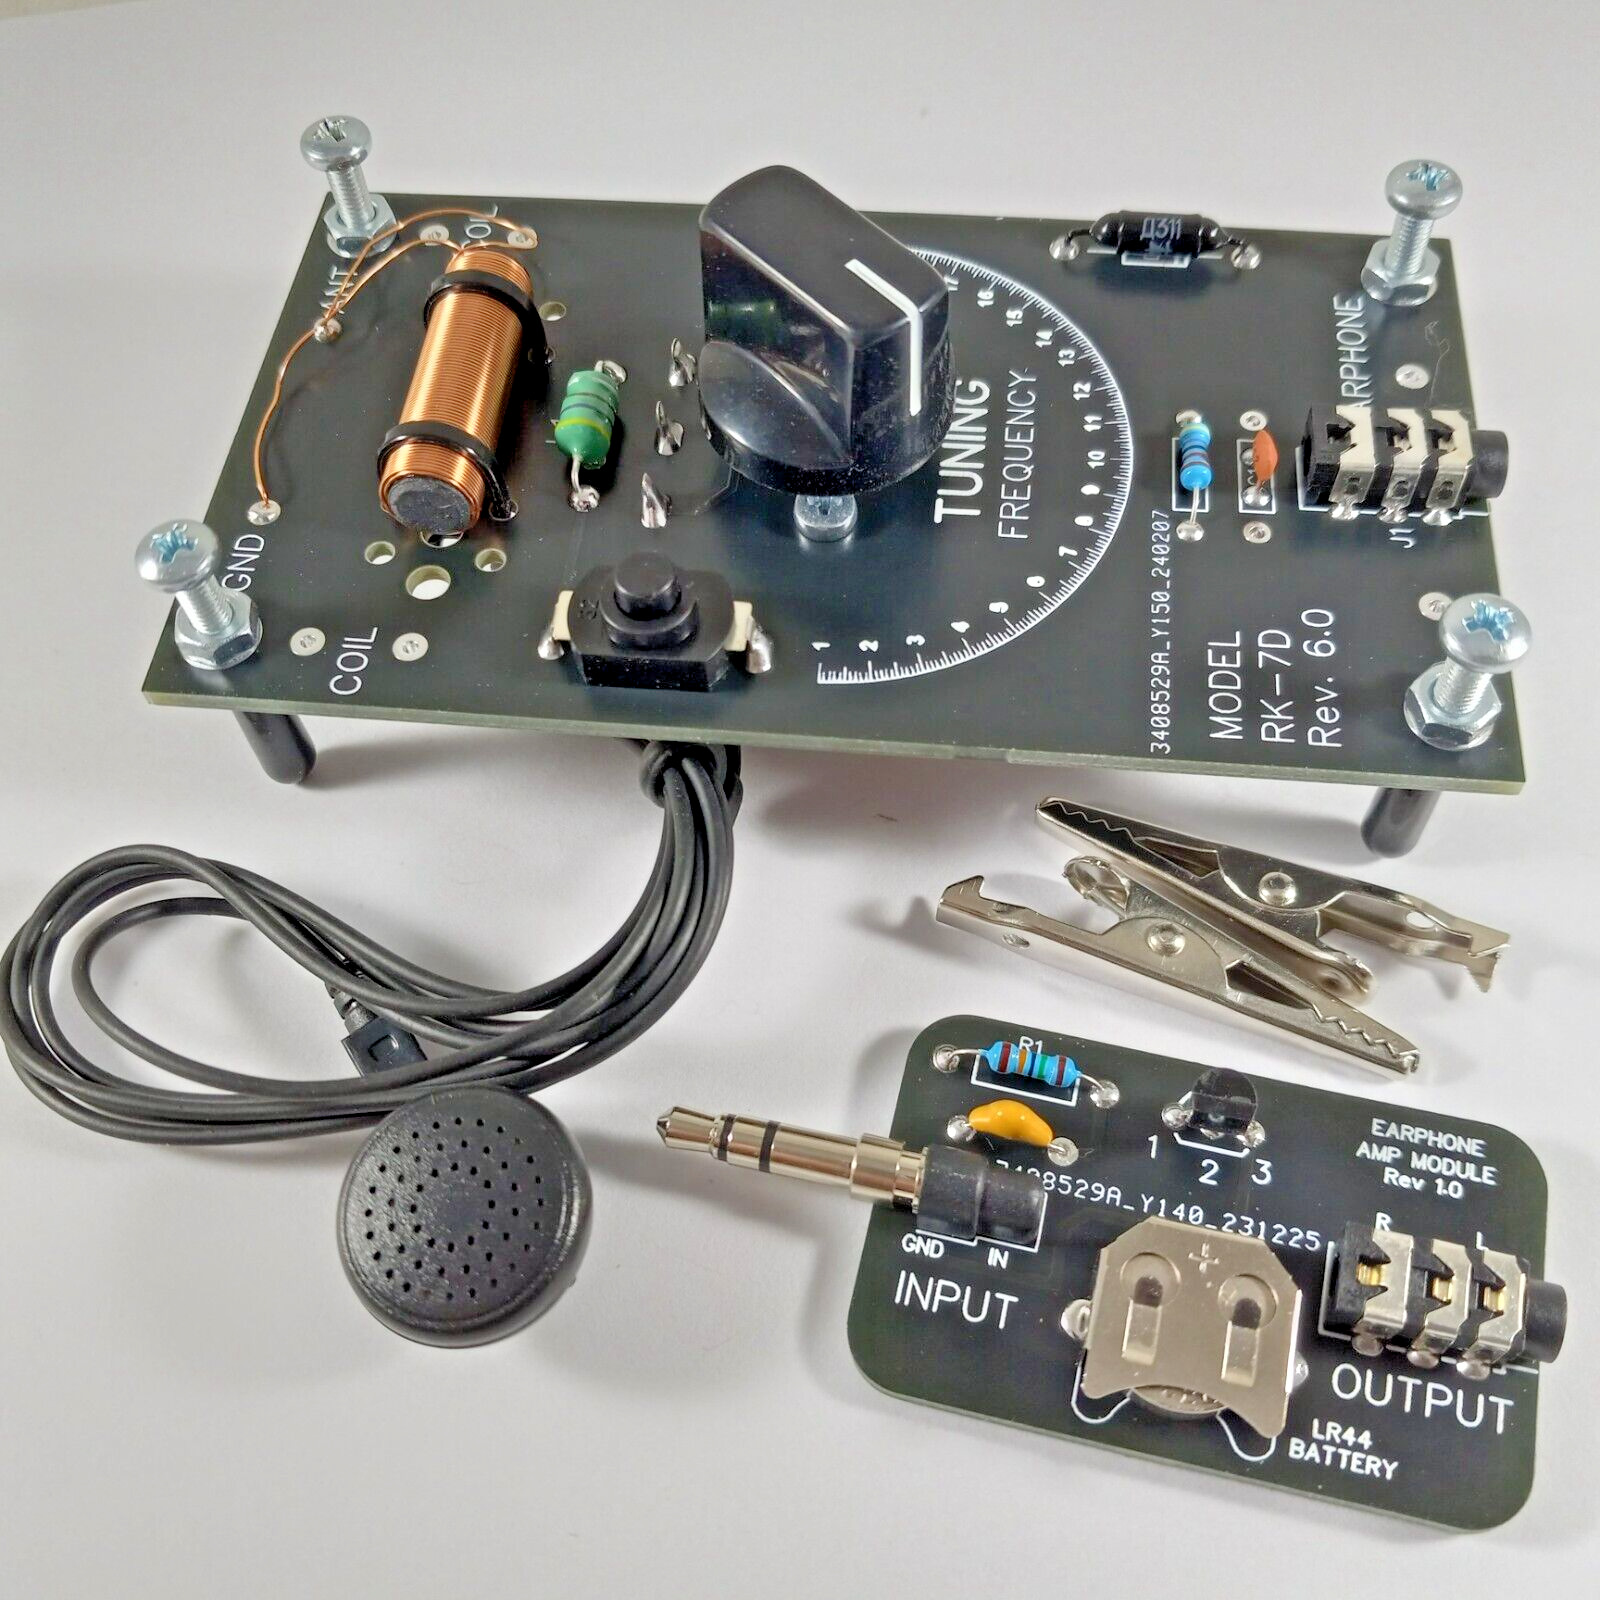 Germanium Diode Crystal Radio Receiver Assembled with Earphone and V2 Amplifier